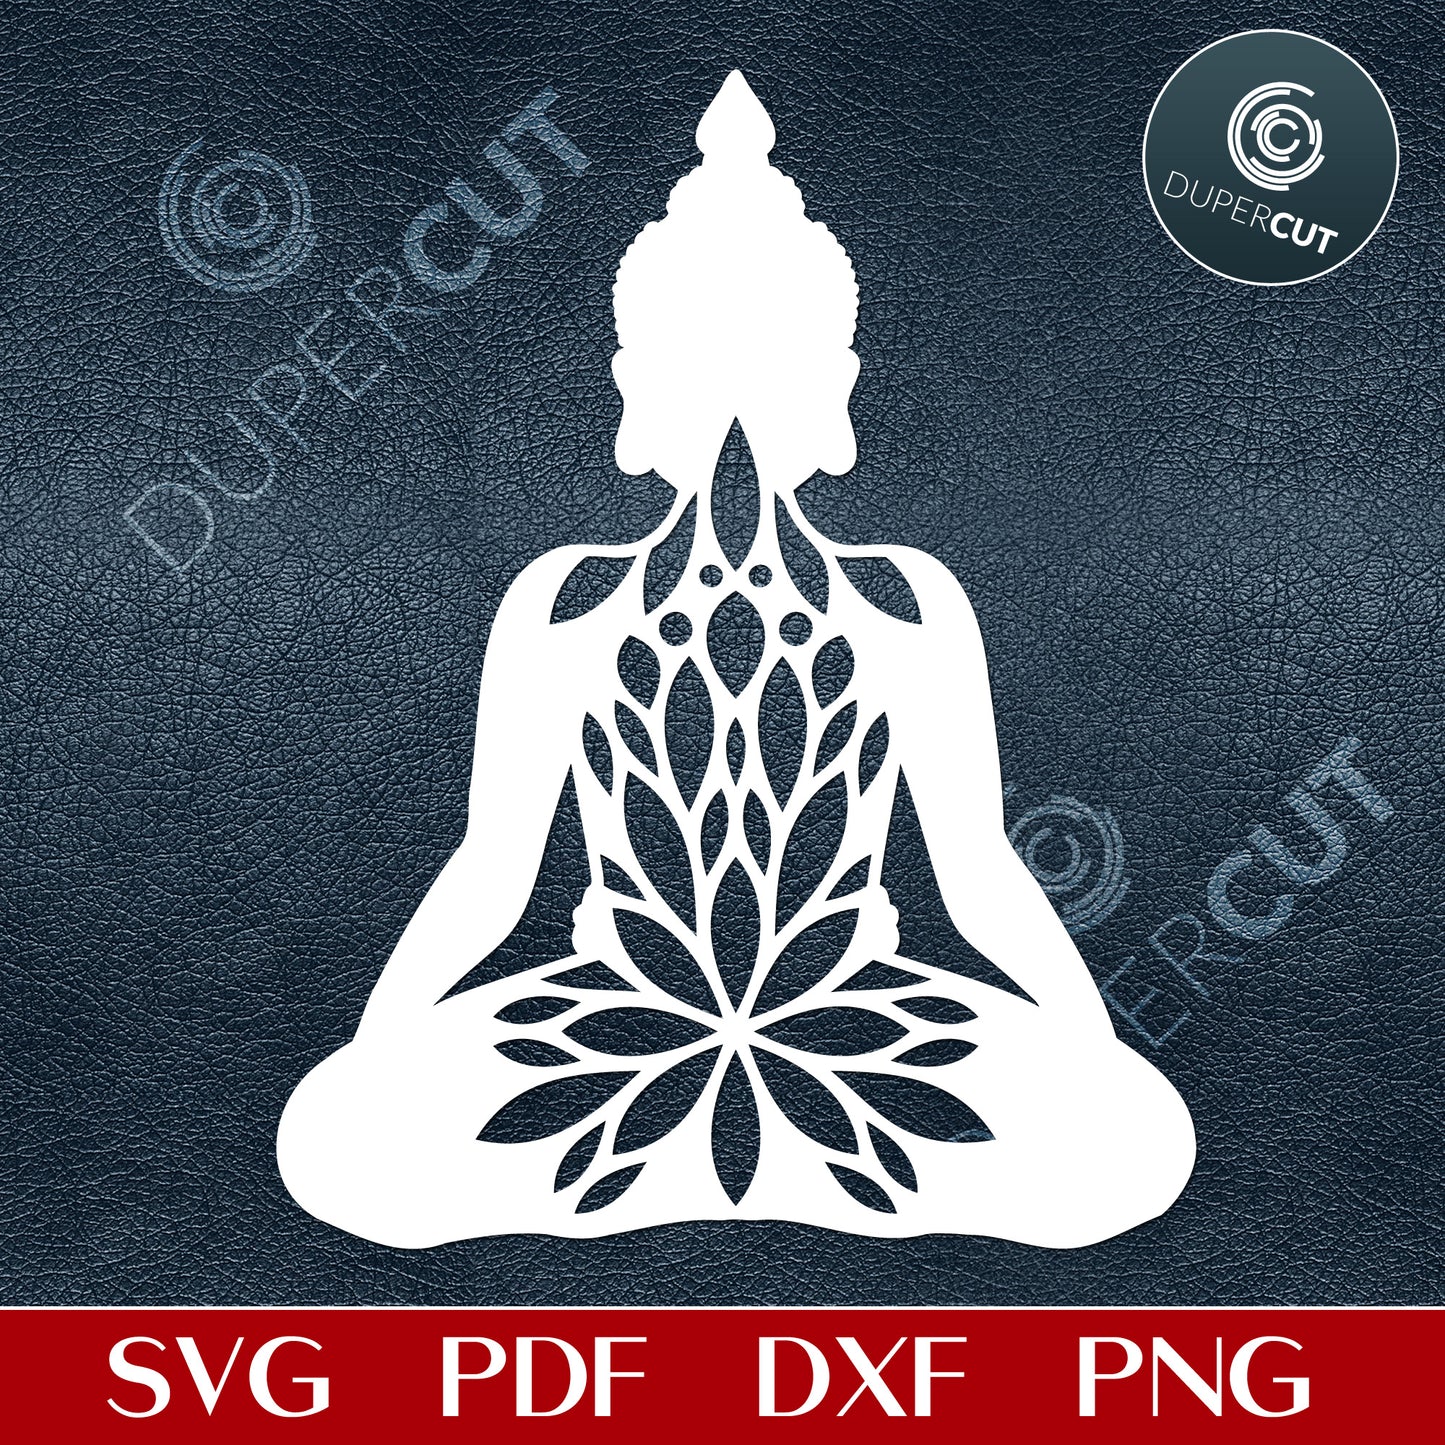 Yoga silhouette - SVG DXF PNG files for Cricut, Silhouette Cameo, Glowforge. For cutting machines, laser engraving, printing, mold making.